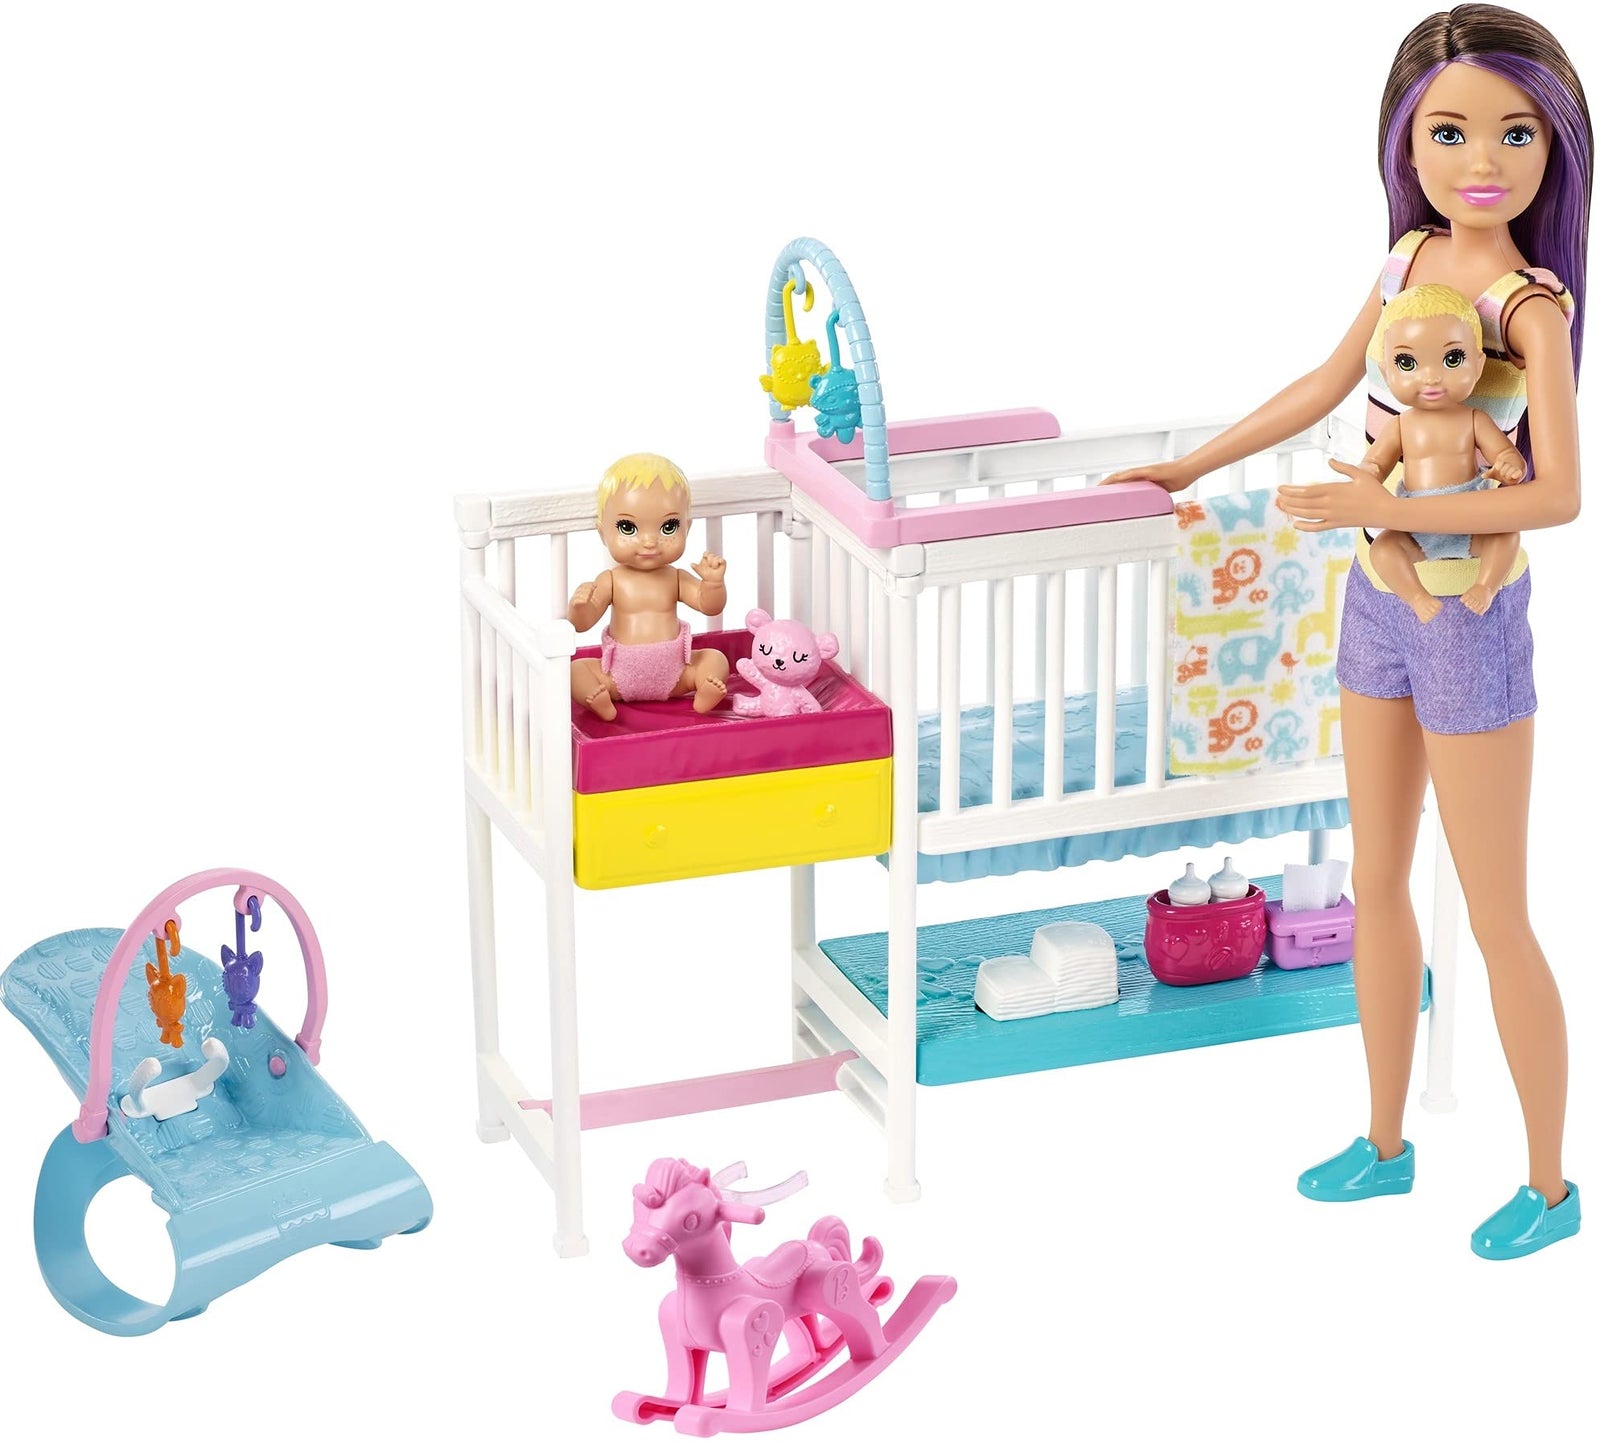 Barbie Nursery Playset with Skipper Babysitters Doll, 2 Baby Dolls, Crib and 10+ Pieces of Working Baby Gear and Themed Toys, Gift Set for 3 to 7 Year Olds, Multicolor